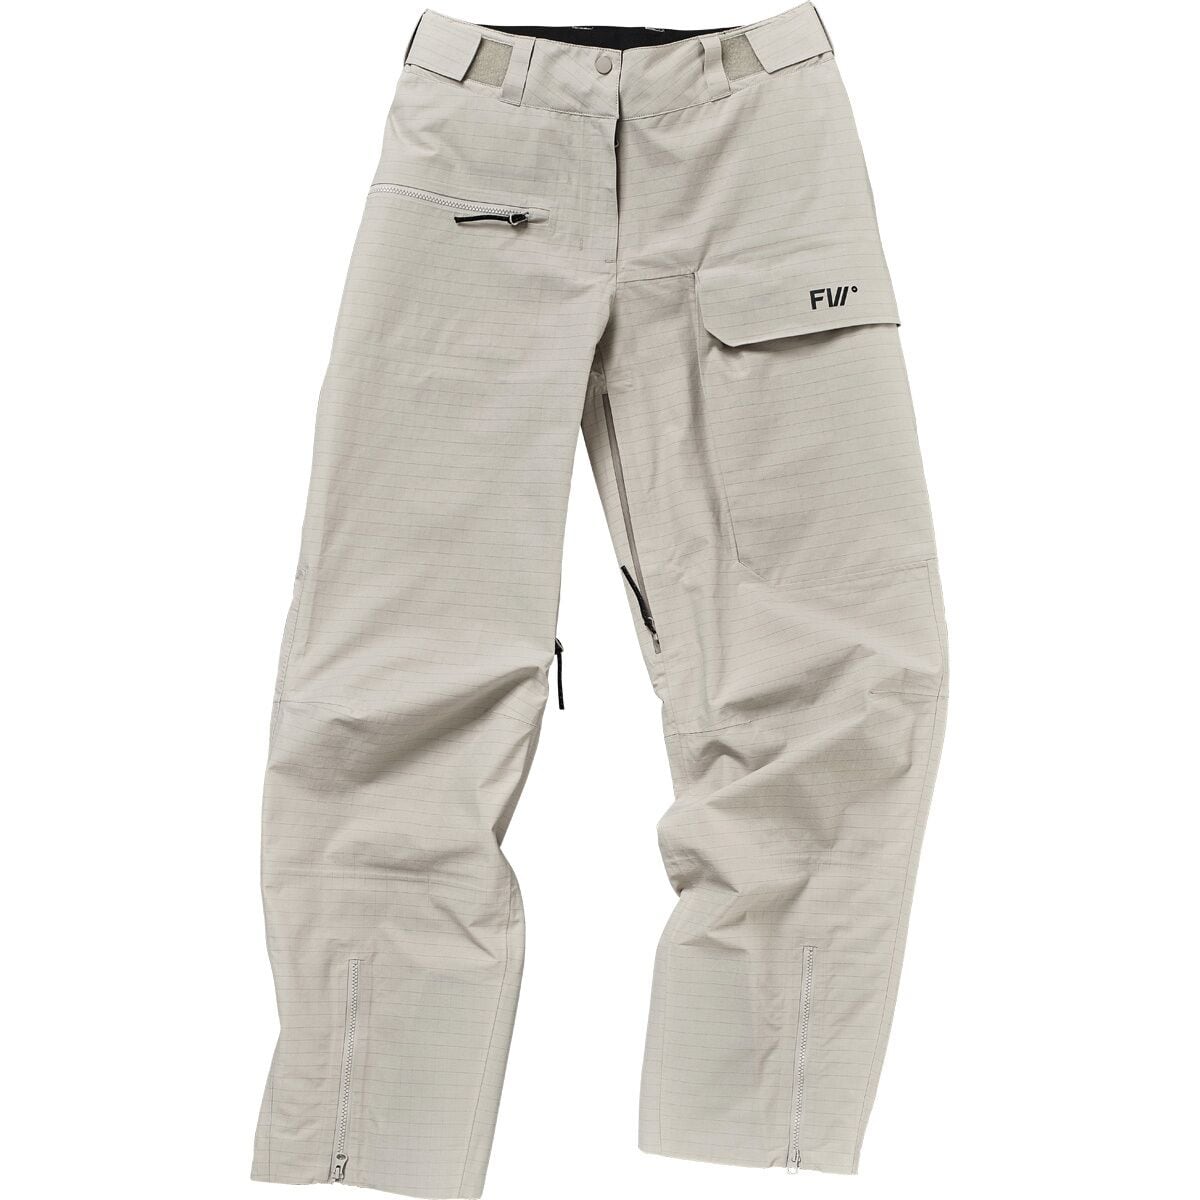 Catalyst Fusion Shell Pant - Women's